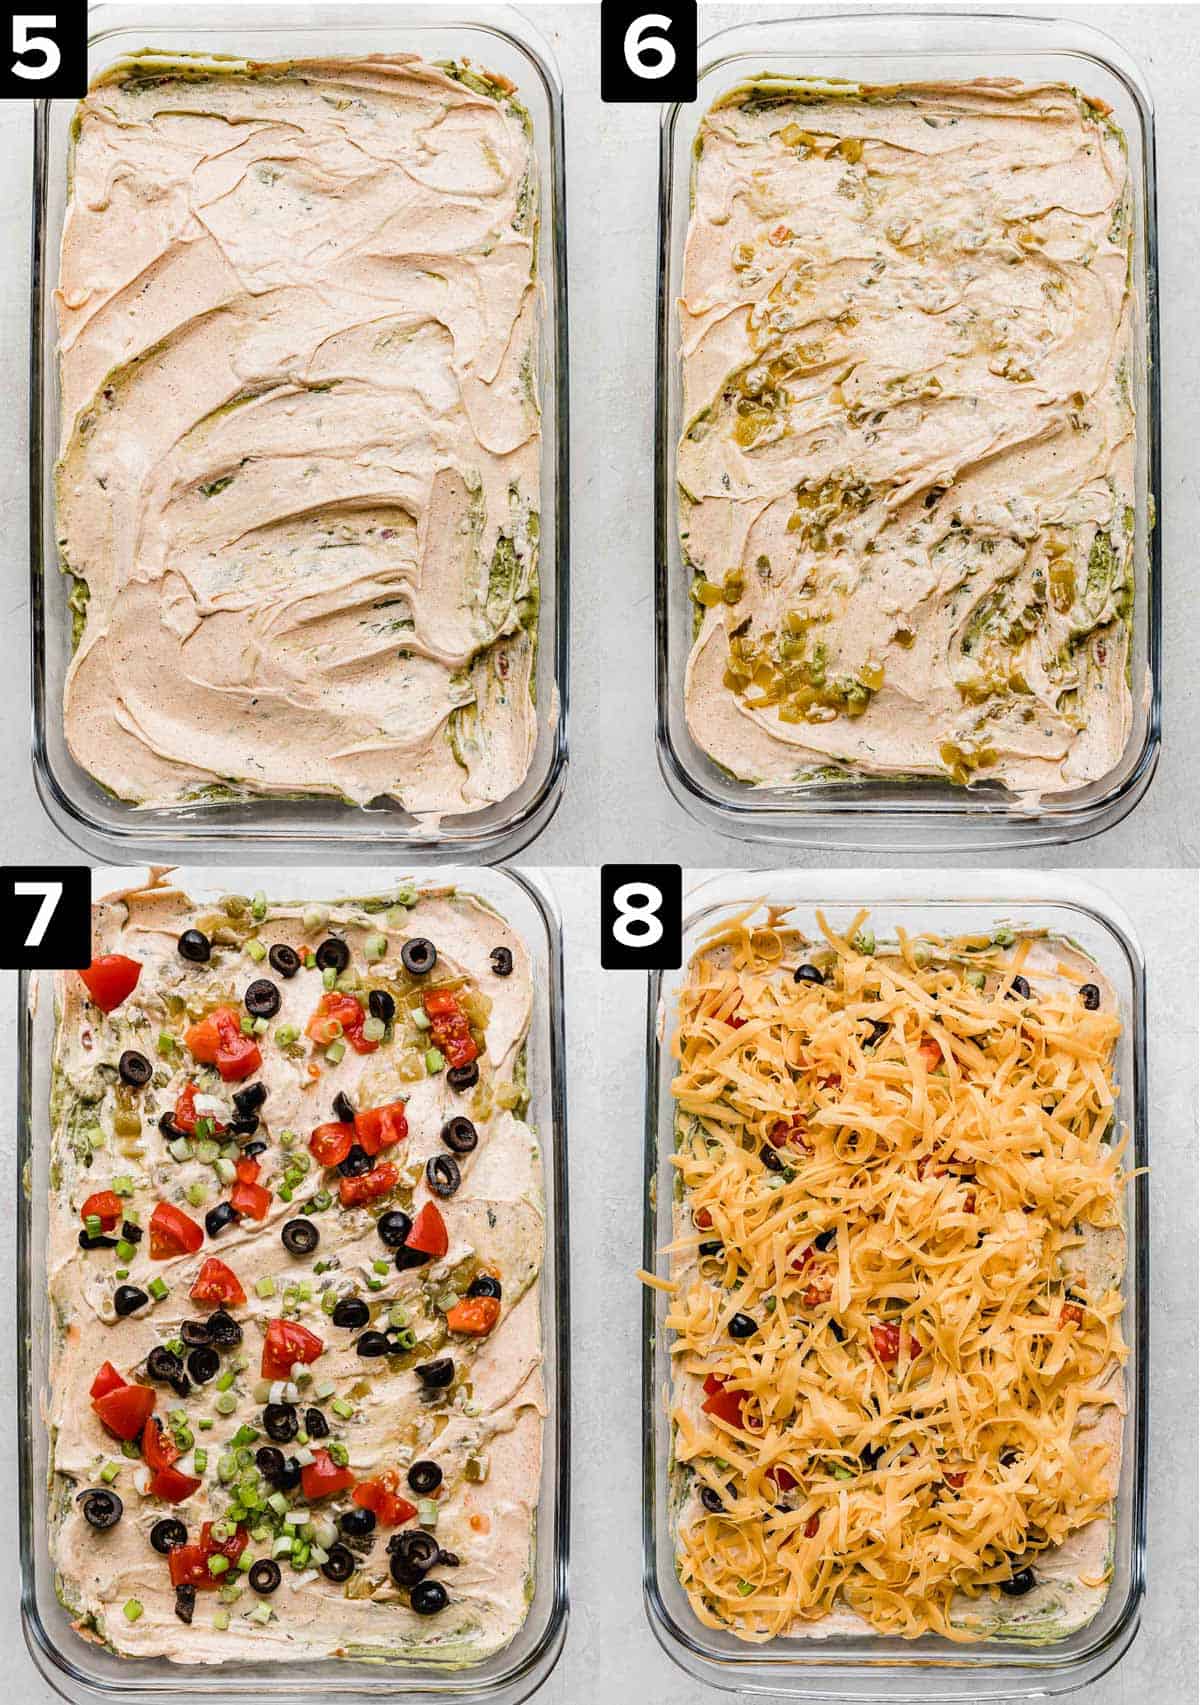 Four images showing a glass rectangle pan with Layered Taco Dip ingredients: top left has sour cream mixture, top right has diced cream chiles spread over the sour cream, bottom left has olives, onions, and tomatoes, bottom right has shredded cheese overtop.